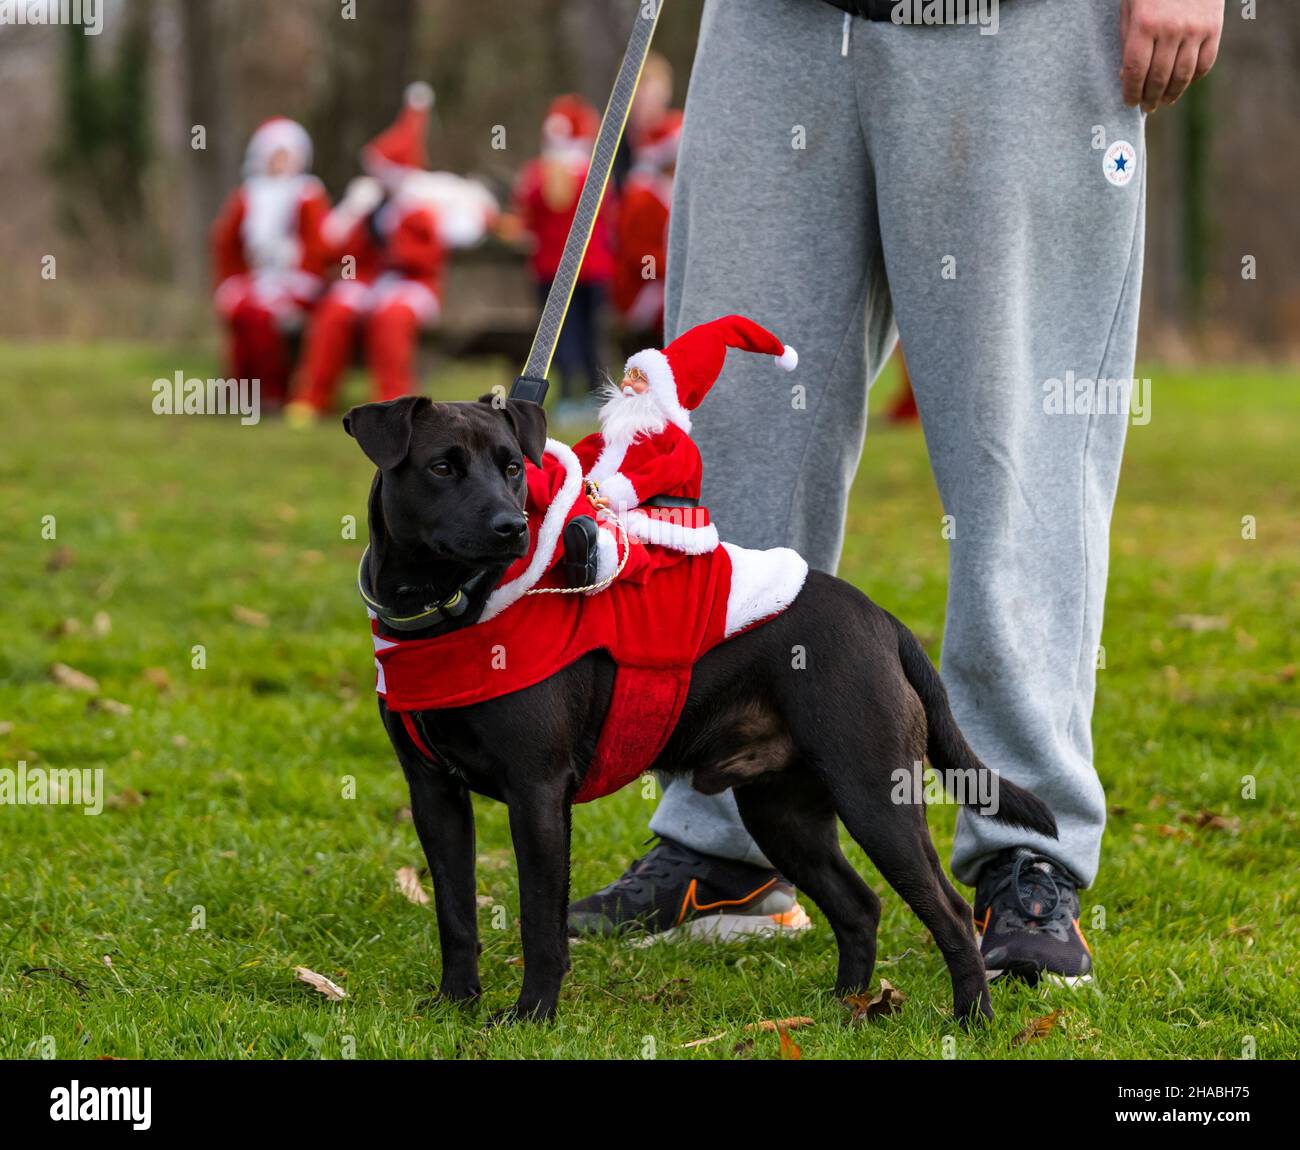 Dalkeith, Midlothian, Scotland, United Kingdom, 12th December 2021. Santa Run and Elf Dash: the charity fund-raising event takes place in Dalkeith Country Park to raise money for CHAS (Children’s Hospices Across Scotland) Pictured: the best dressed dog wins a prize with a Santa costume Stock Photo